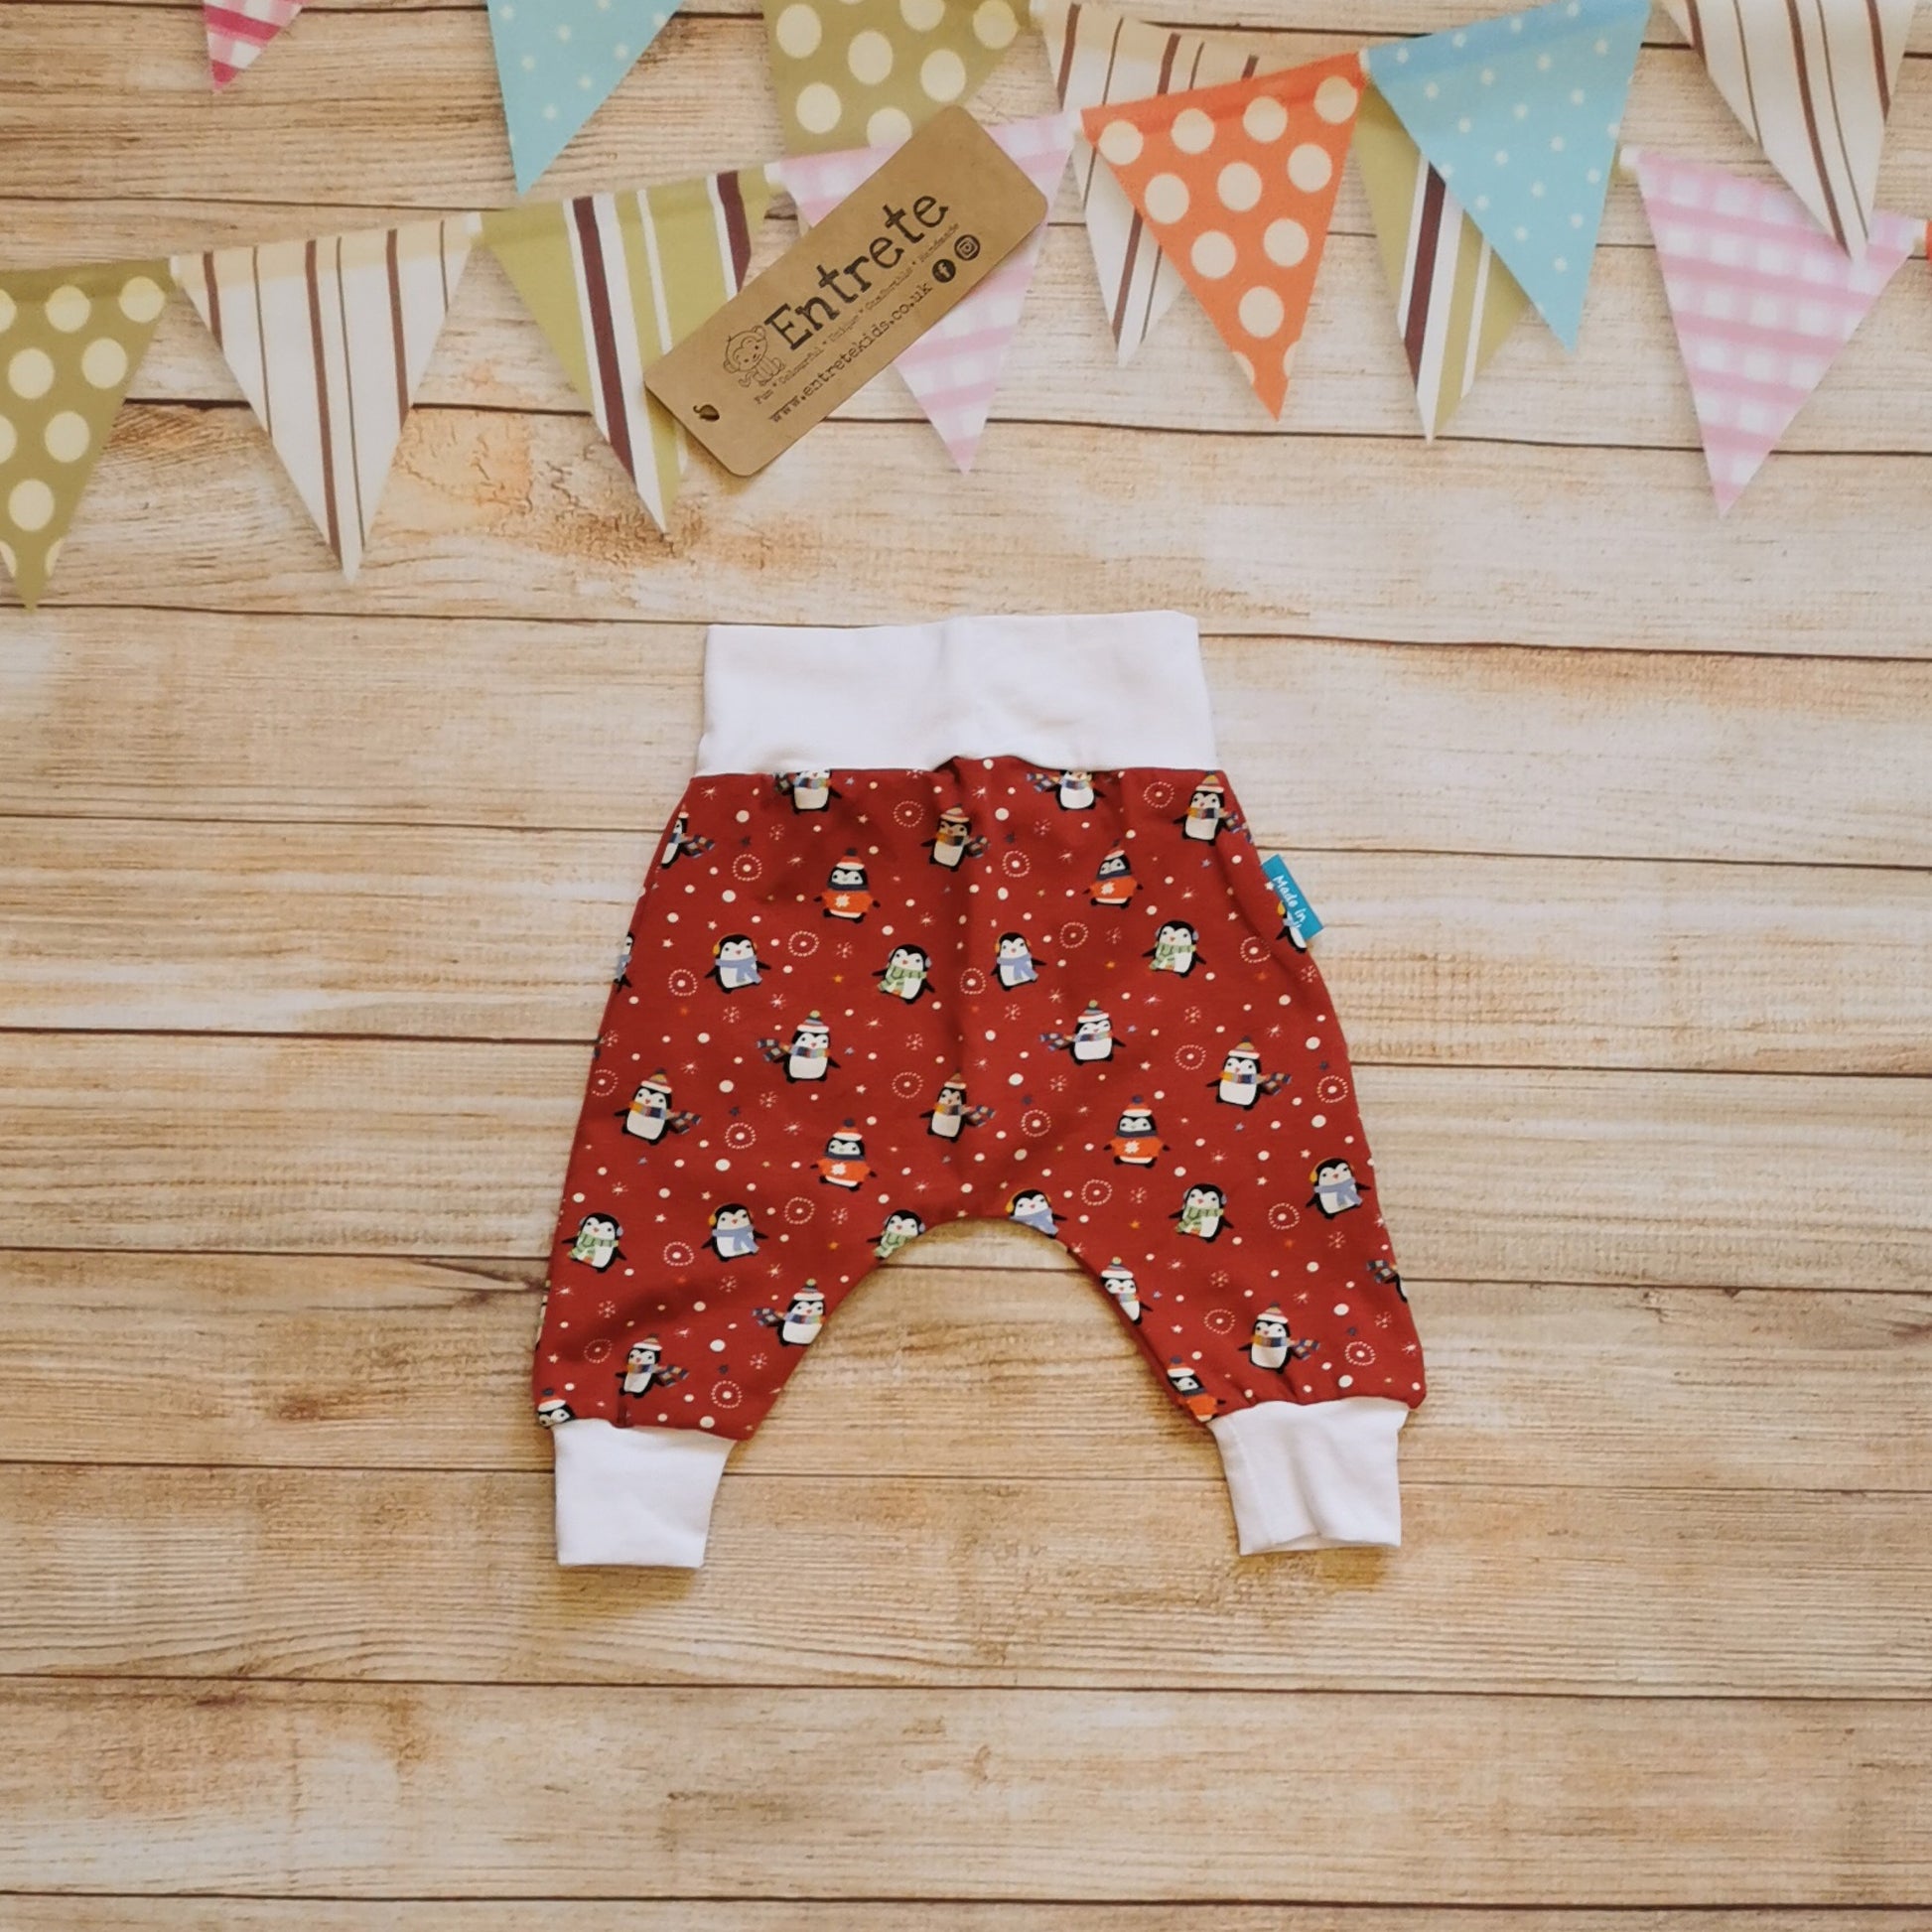 Rear view of the super comfy harem pants in a fun Christmas design. Handmade using red penguins cotton jersey and white cotton jersey.